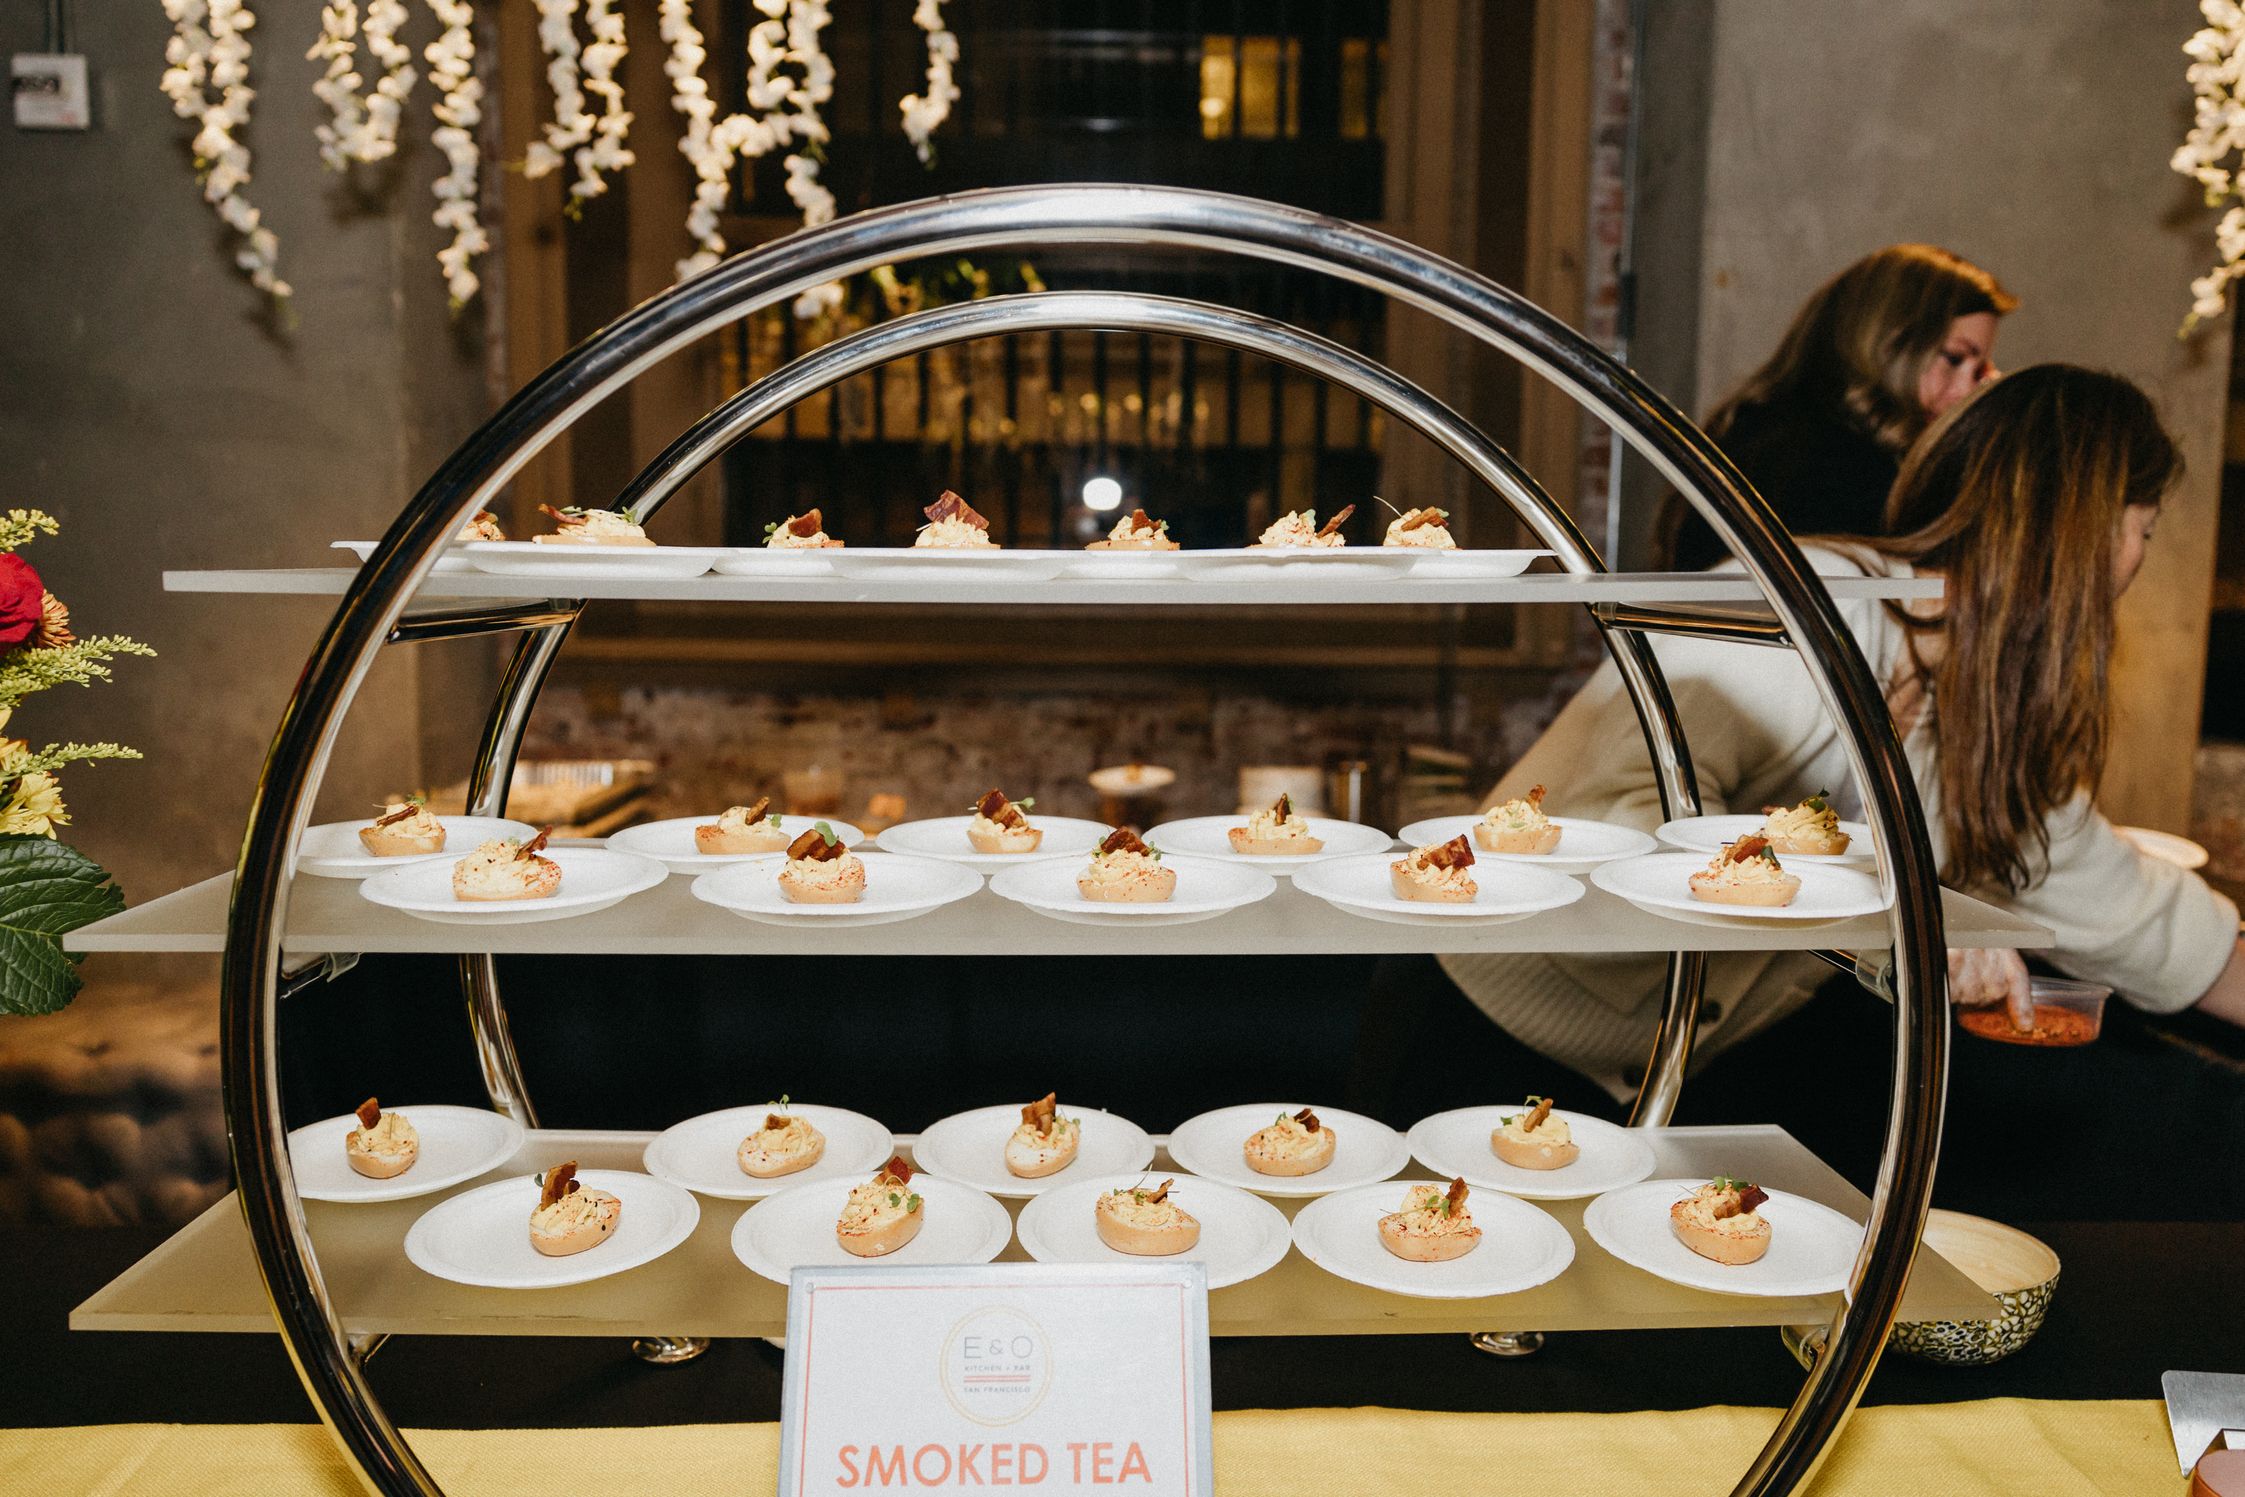 A 3-tiered shelf of desserts beautifully plated at the event